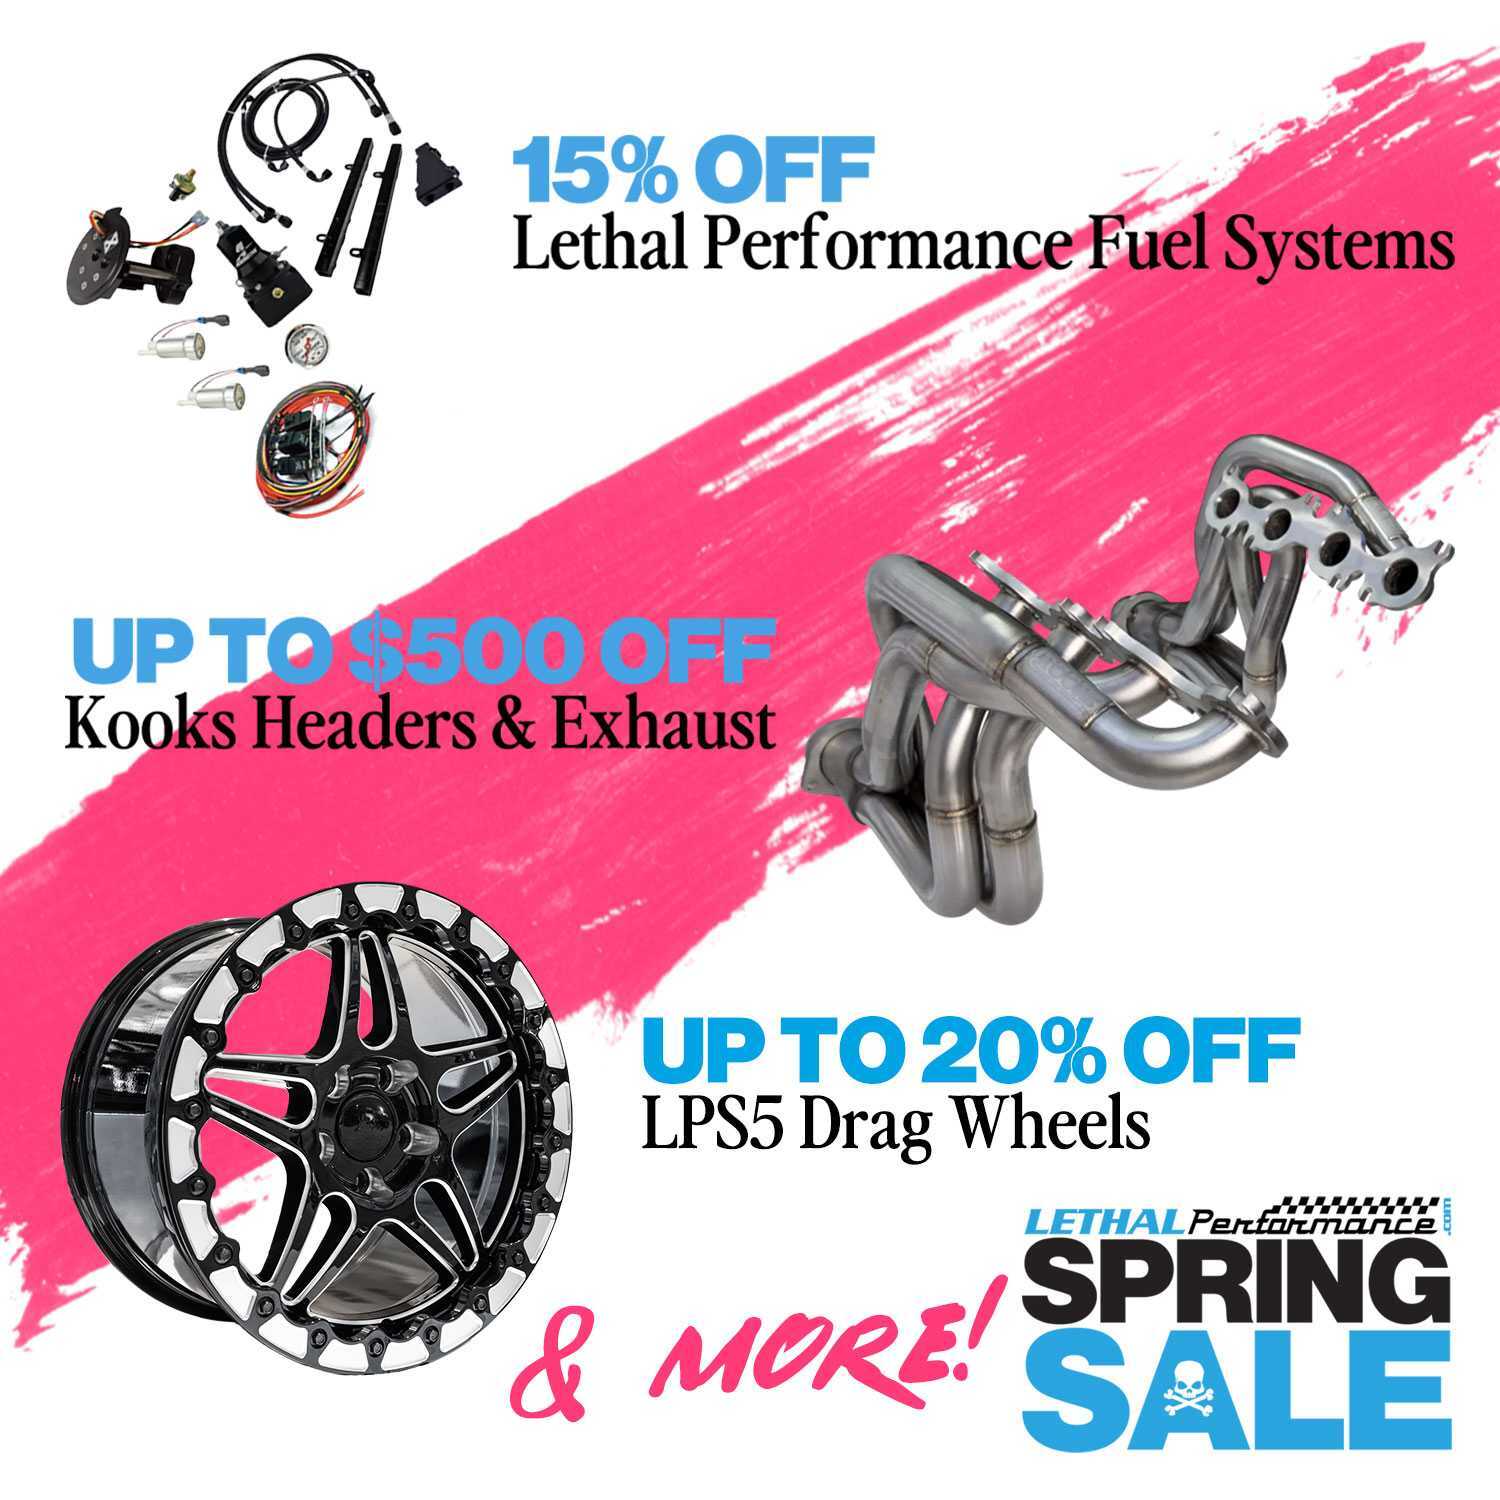 S650 Mustang Spring SALE has SPRUNG here at Lethal Performance!! received_377166758548594